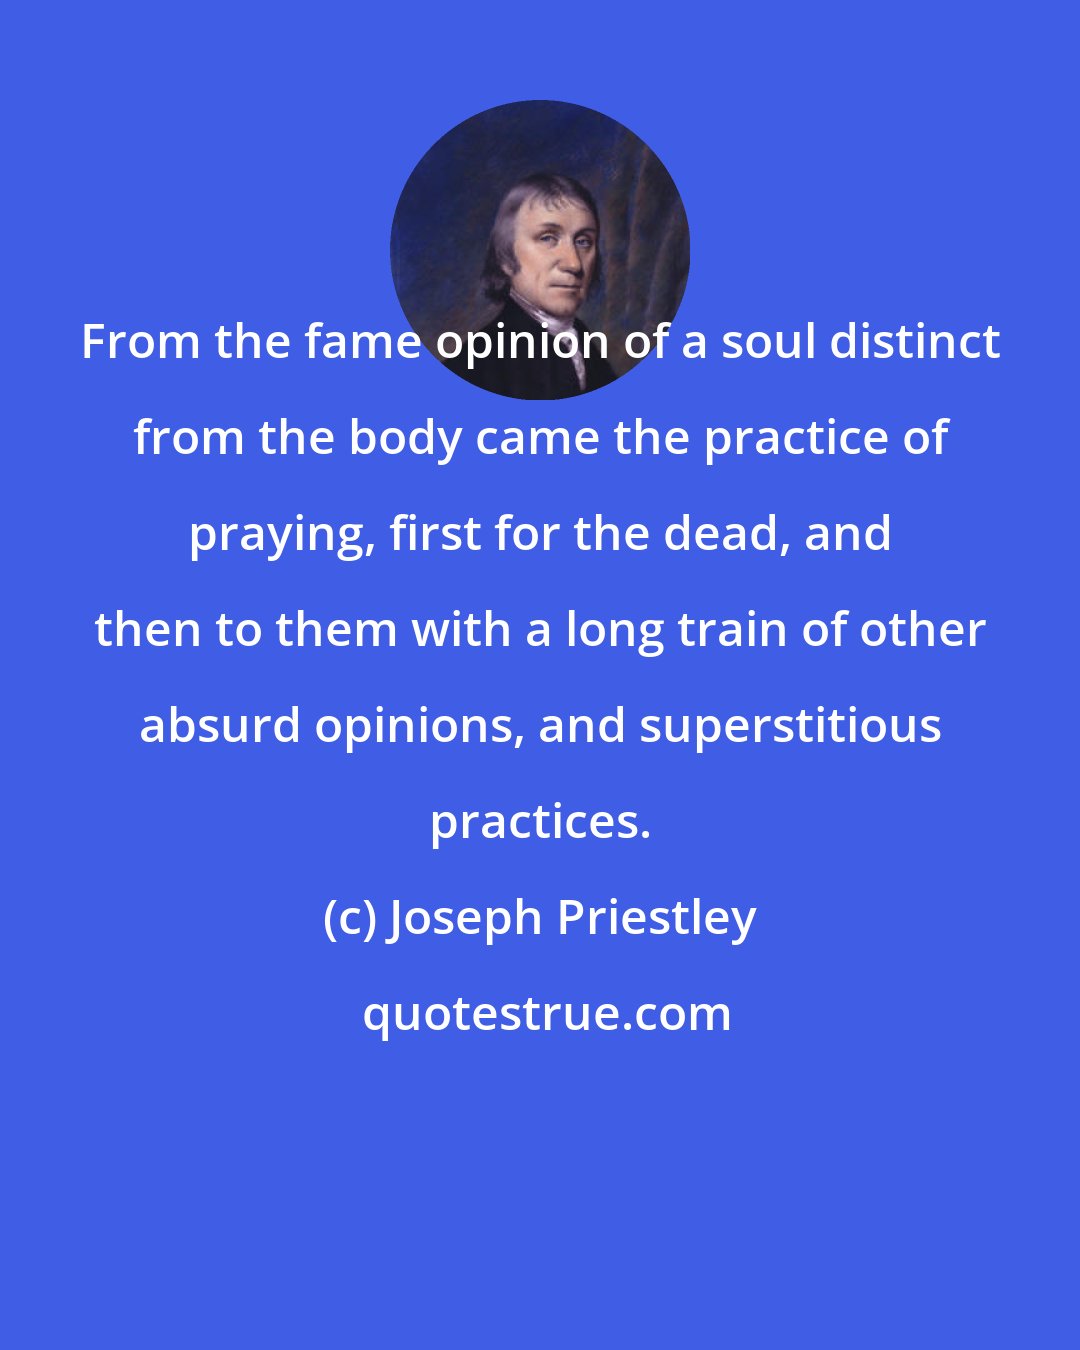 Joseph Priestley: From the fame opinion of a soul distinct from the body came the practice of praying, first for the dead, and then to them with a long train of other absurd opinions, and superstitious practices.